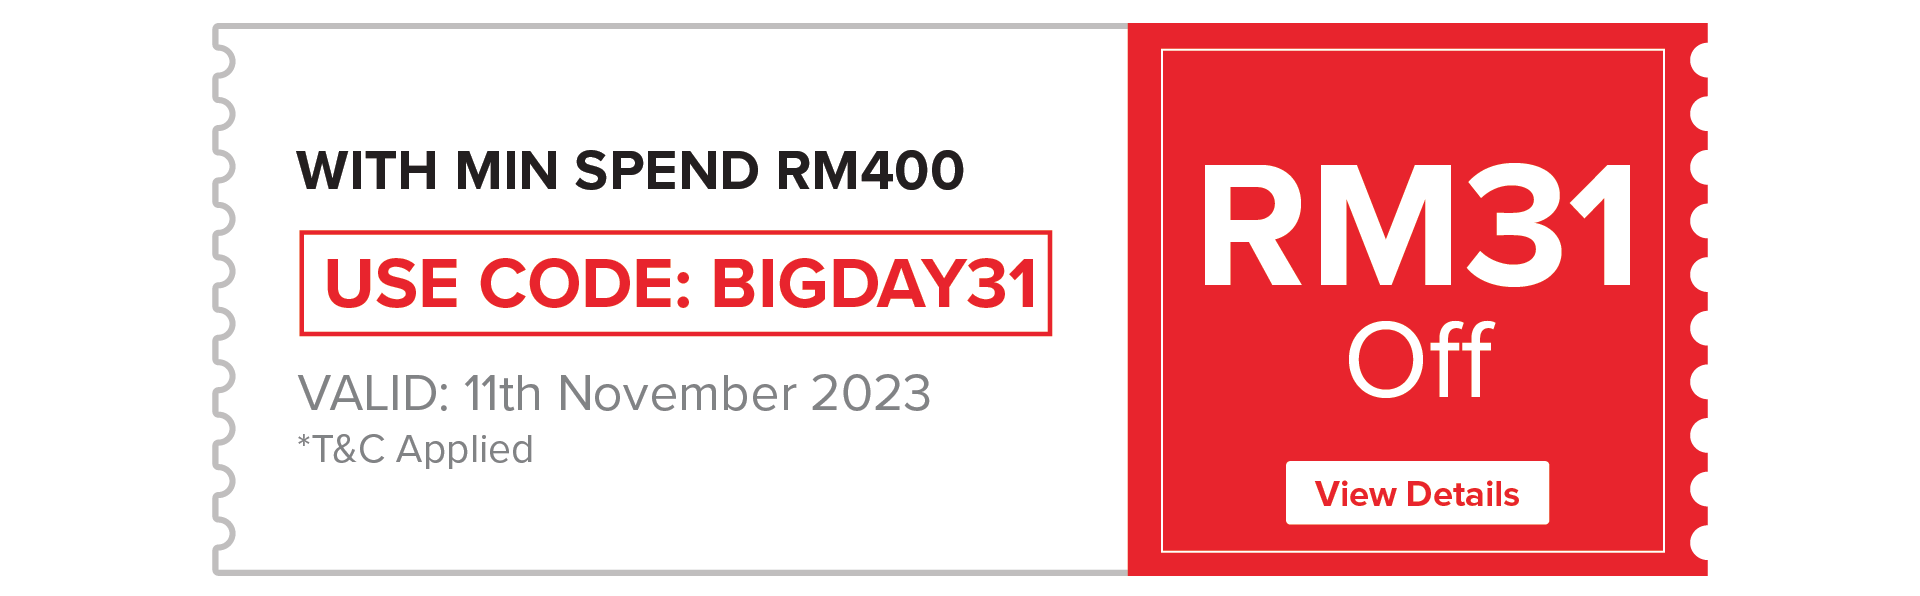 RM27 Off with min spend RM340